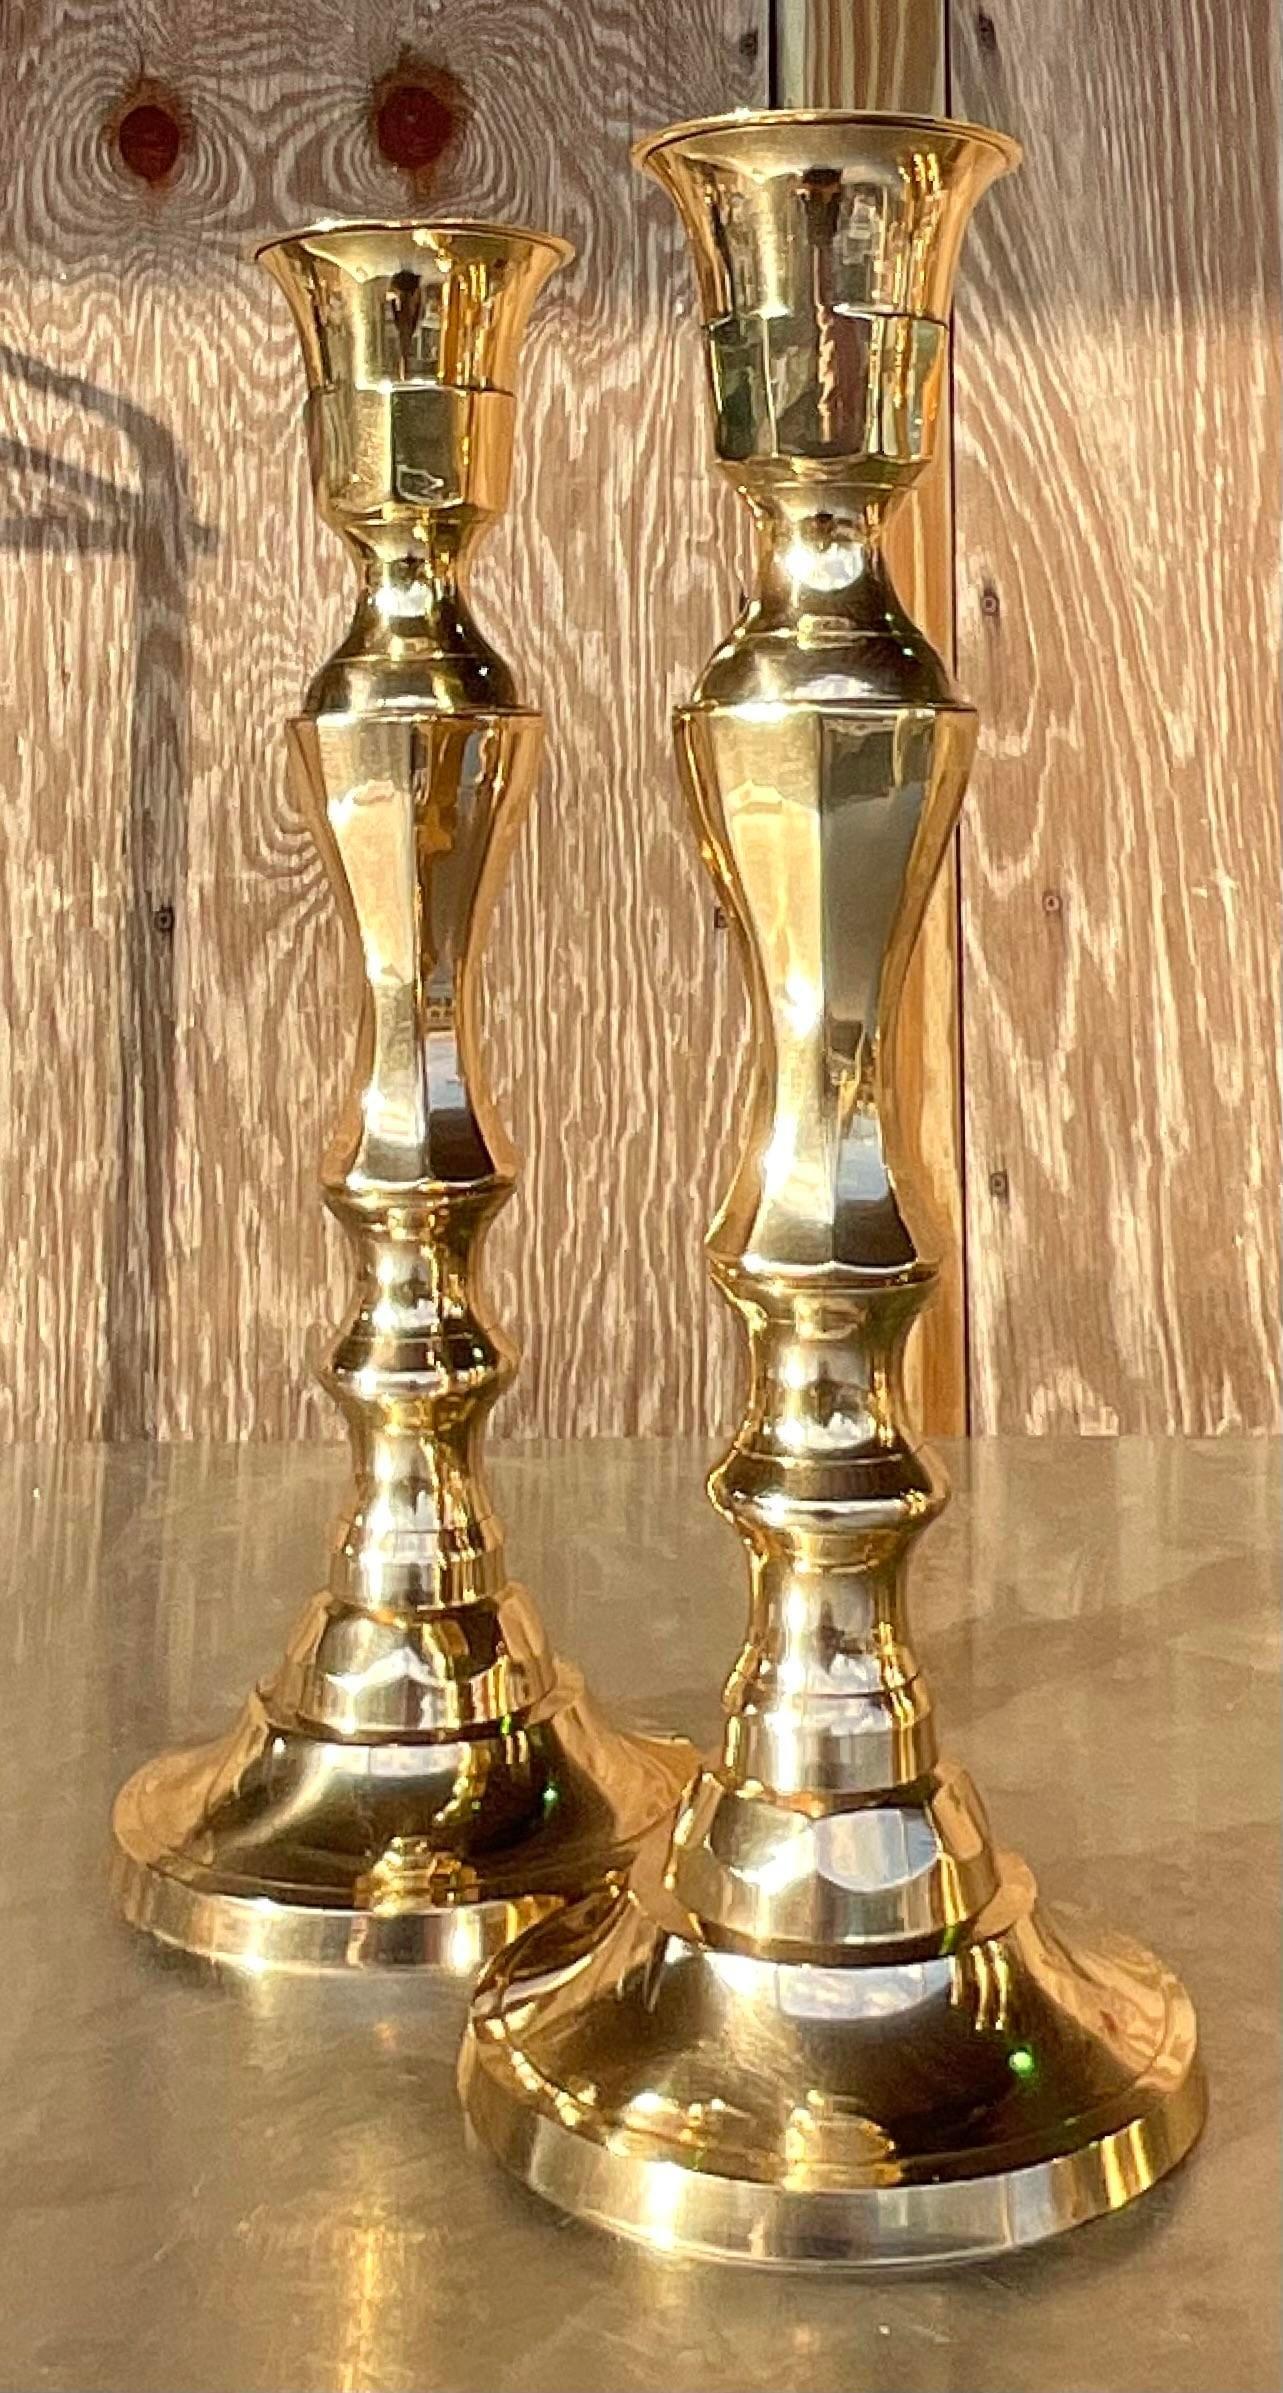 A sensational pair of vintage Regency candlesticks. Beautiful mirror polished brass with a chic faceted design. Acquired from a Palm Beach estate.